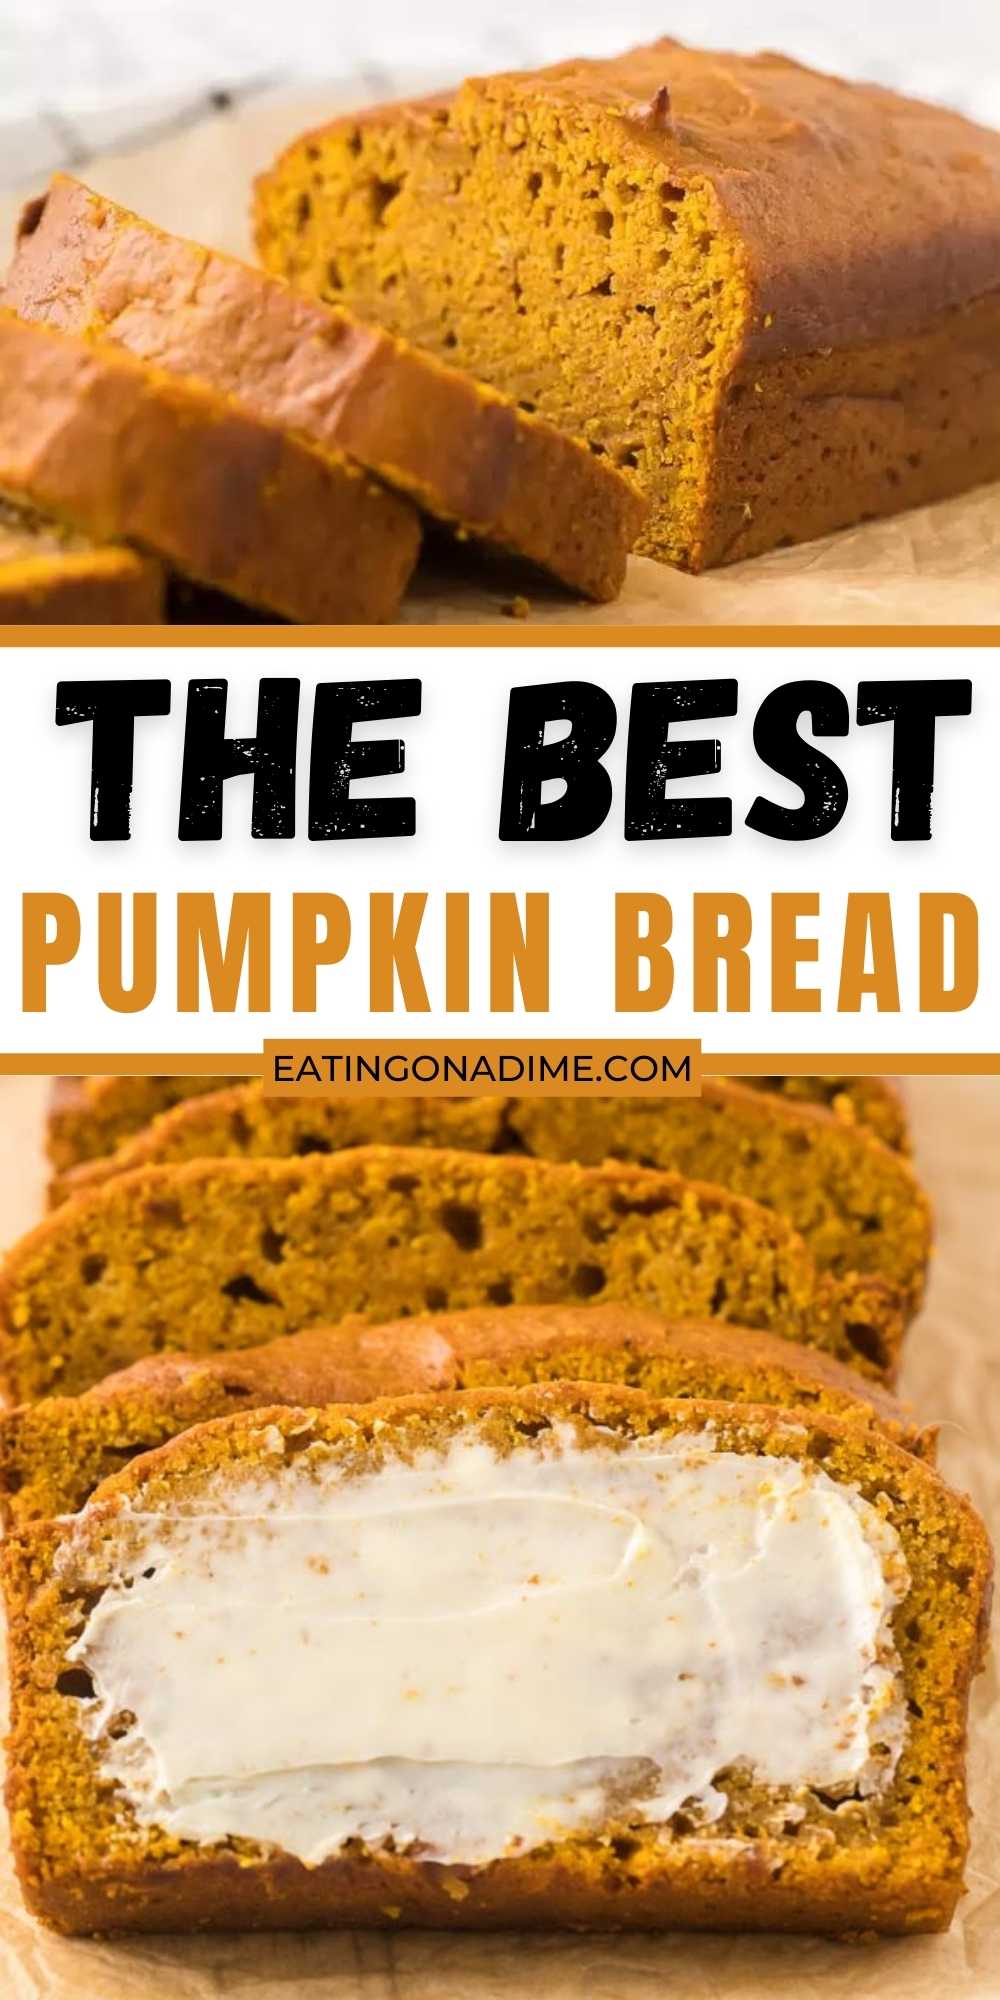 This is the BEST pumpkin bread recipe that is easy to make and delicious too!. It is simple to make and this Pumpkin Bread Recipe is moist every time! Try this recipe for Pumpkin Bread this Fall! #eatingonadime #pumpkingrecipes #breadrecipes #breakfastrecipes 
